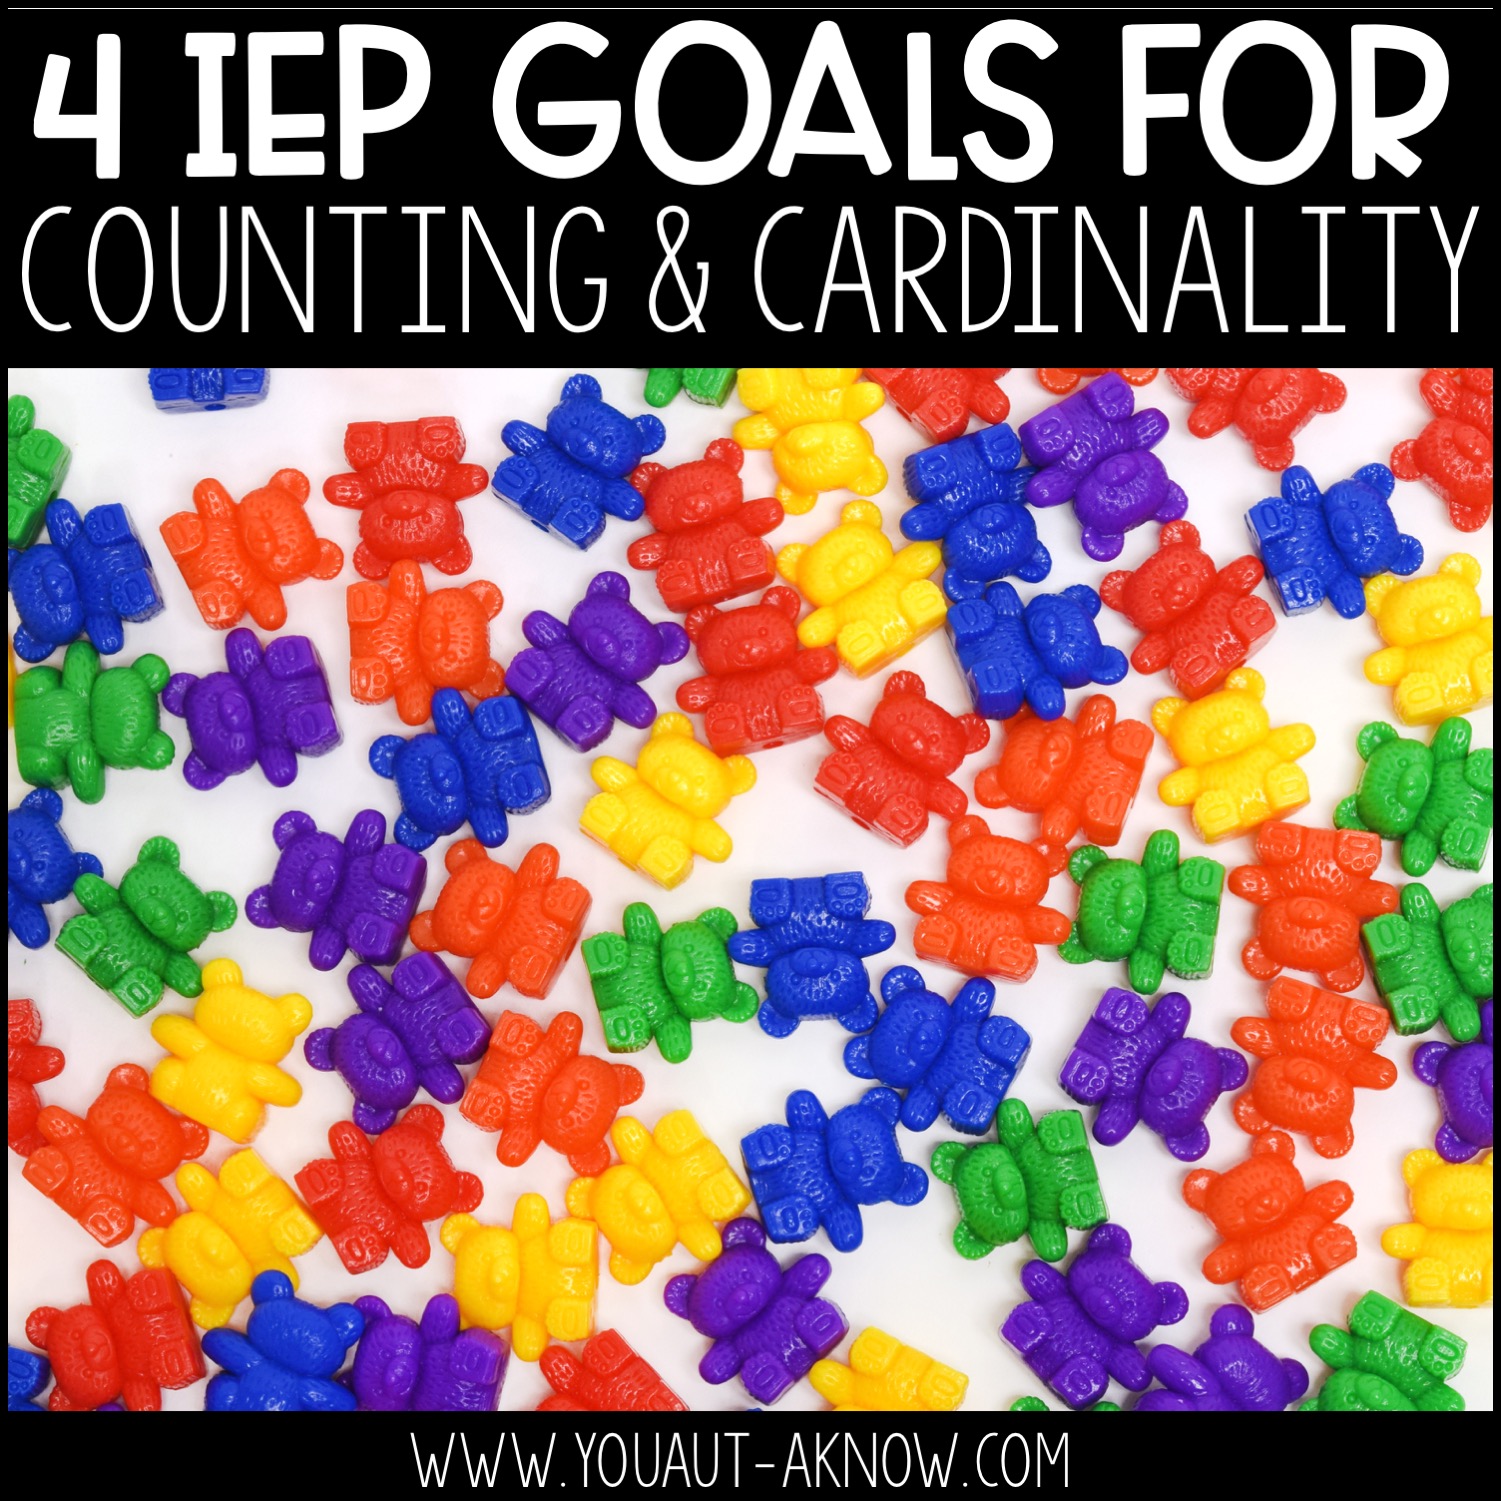 19 IEP Goals for Counting and Cardinality - You Aut-A Know